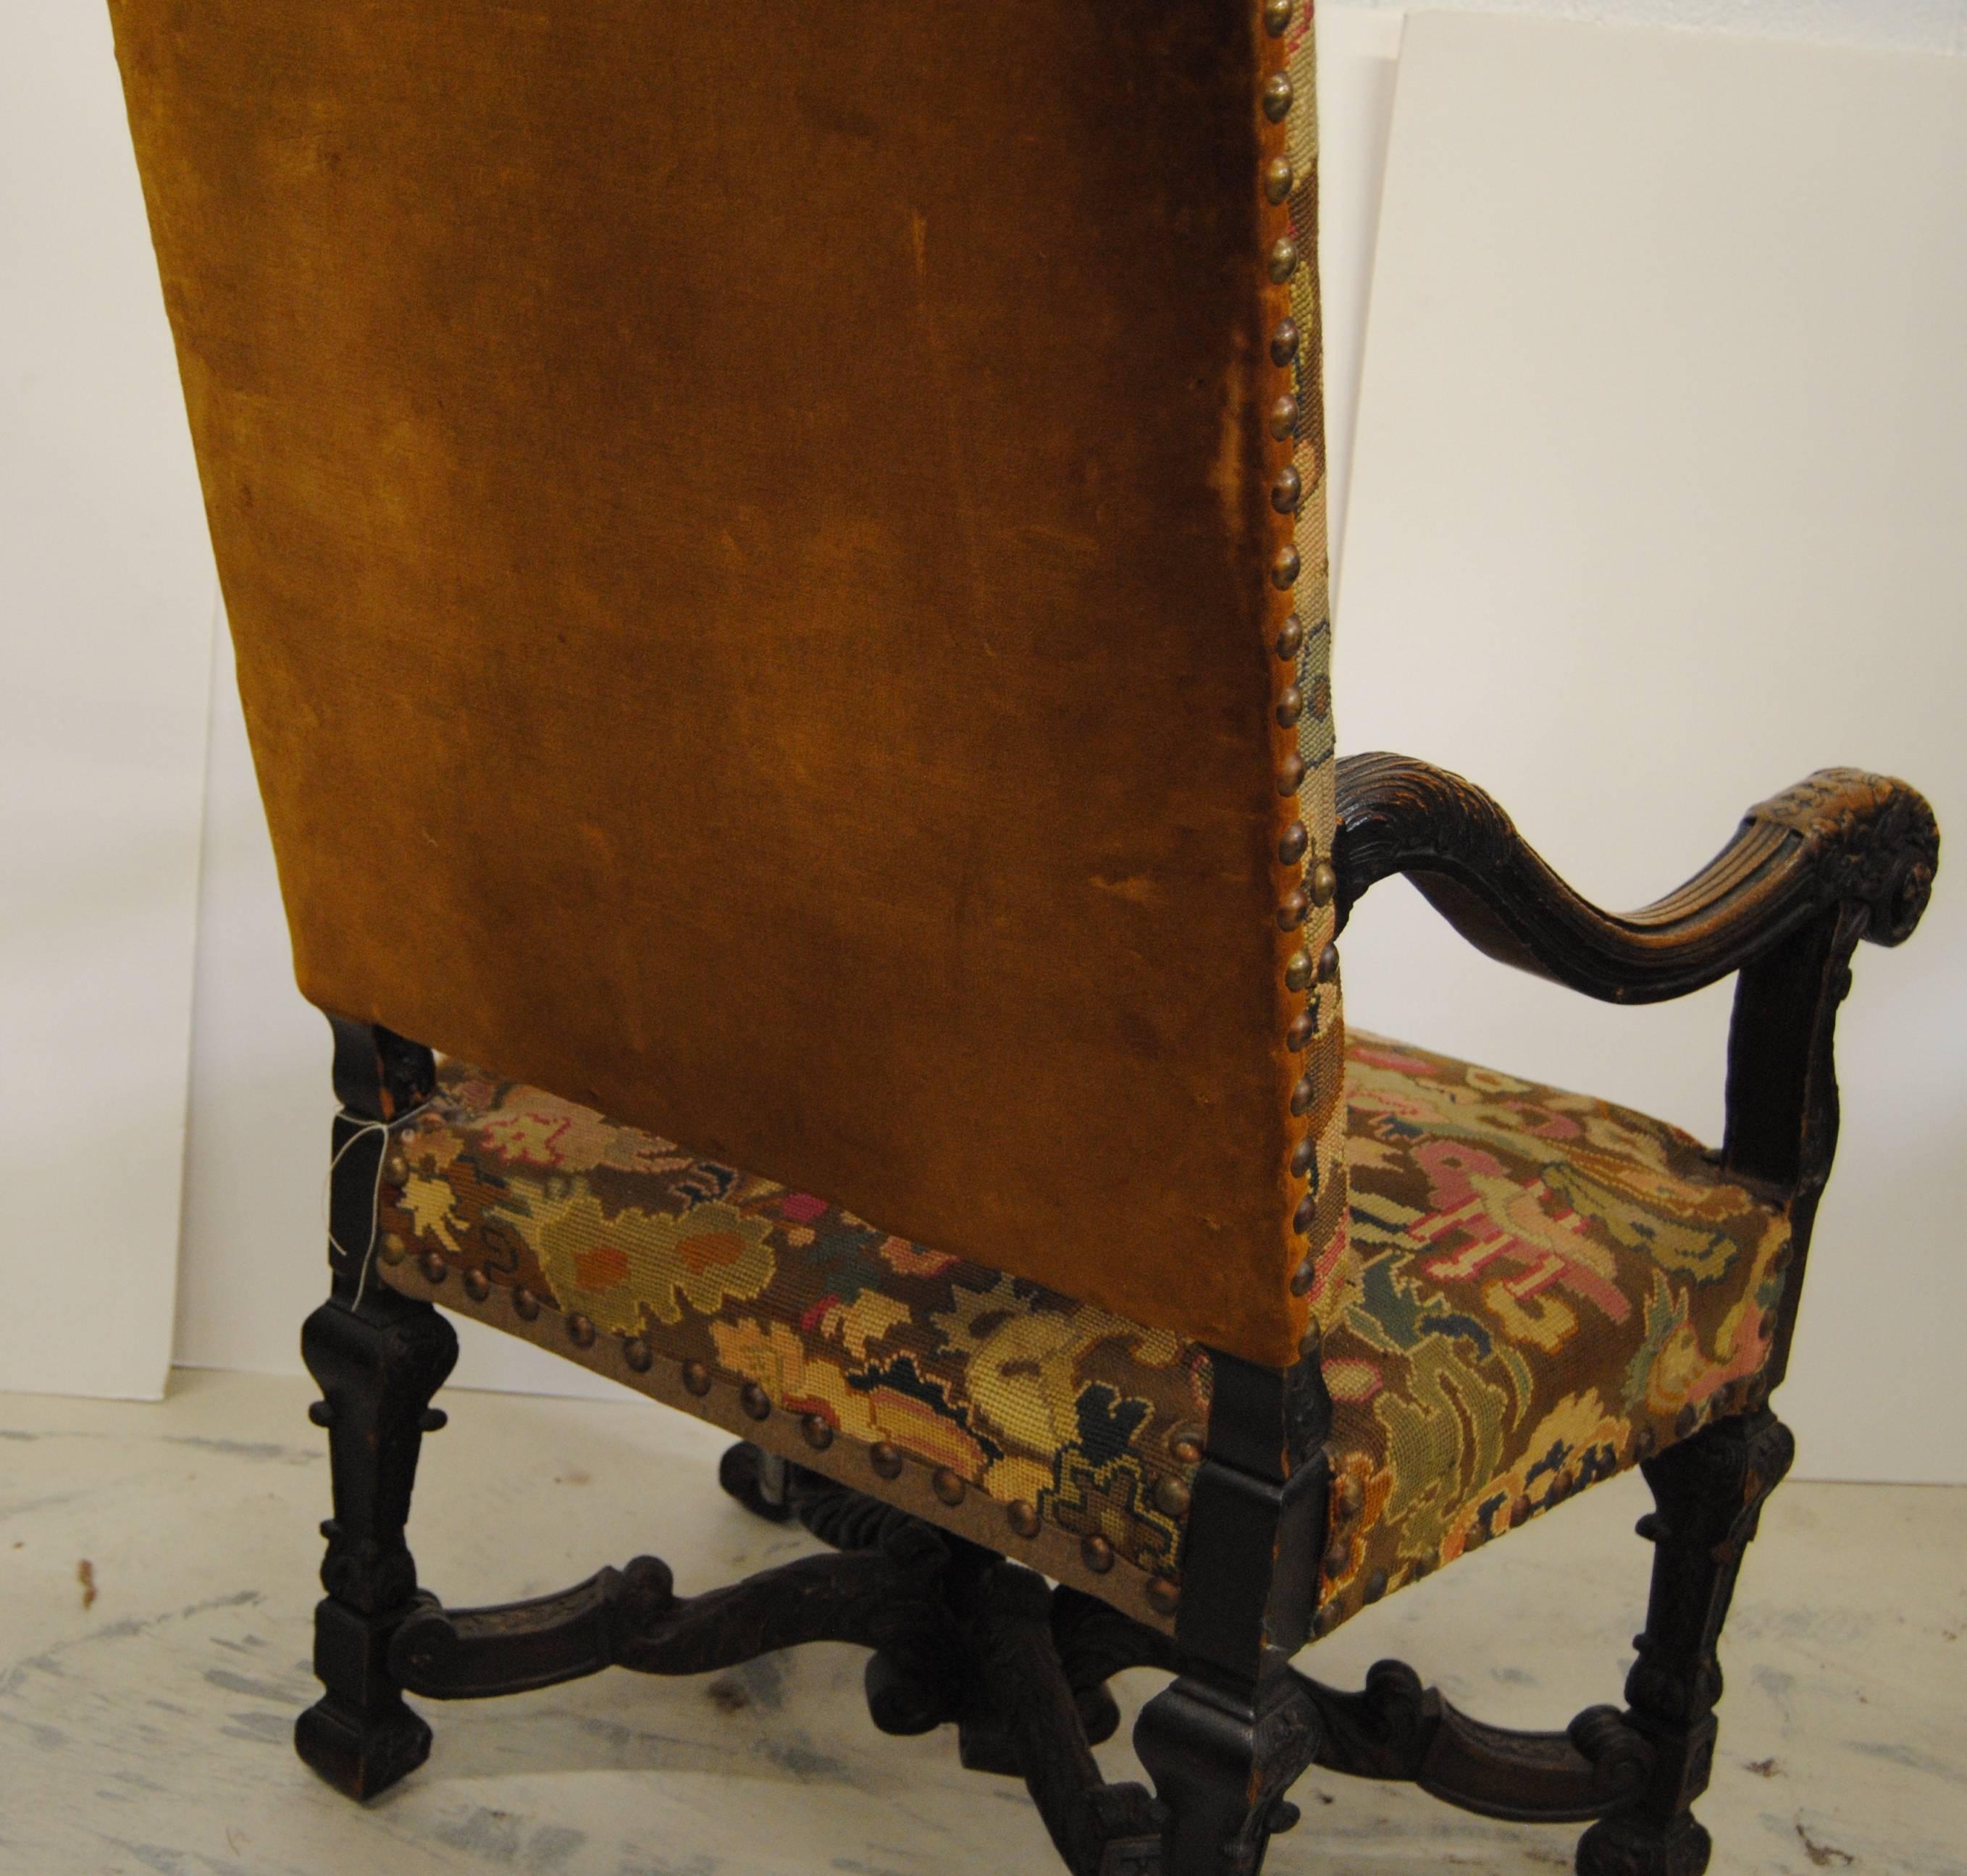 Antique French Chair with Original Needlepoint Upholstery In Excellent Condition For Sale In Glen Ellyn, IL